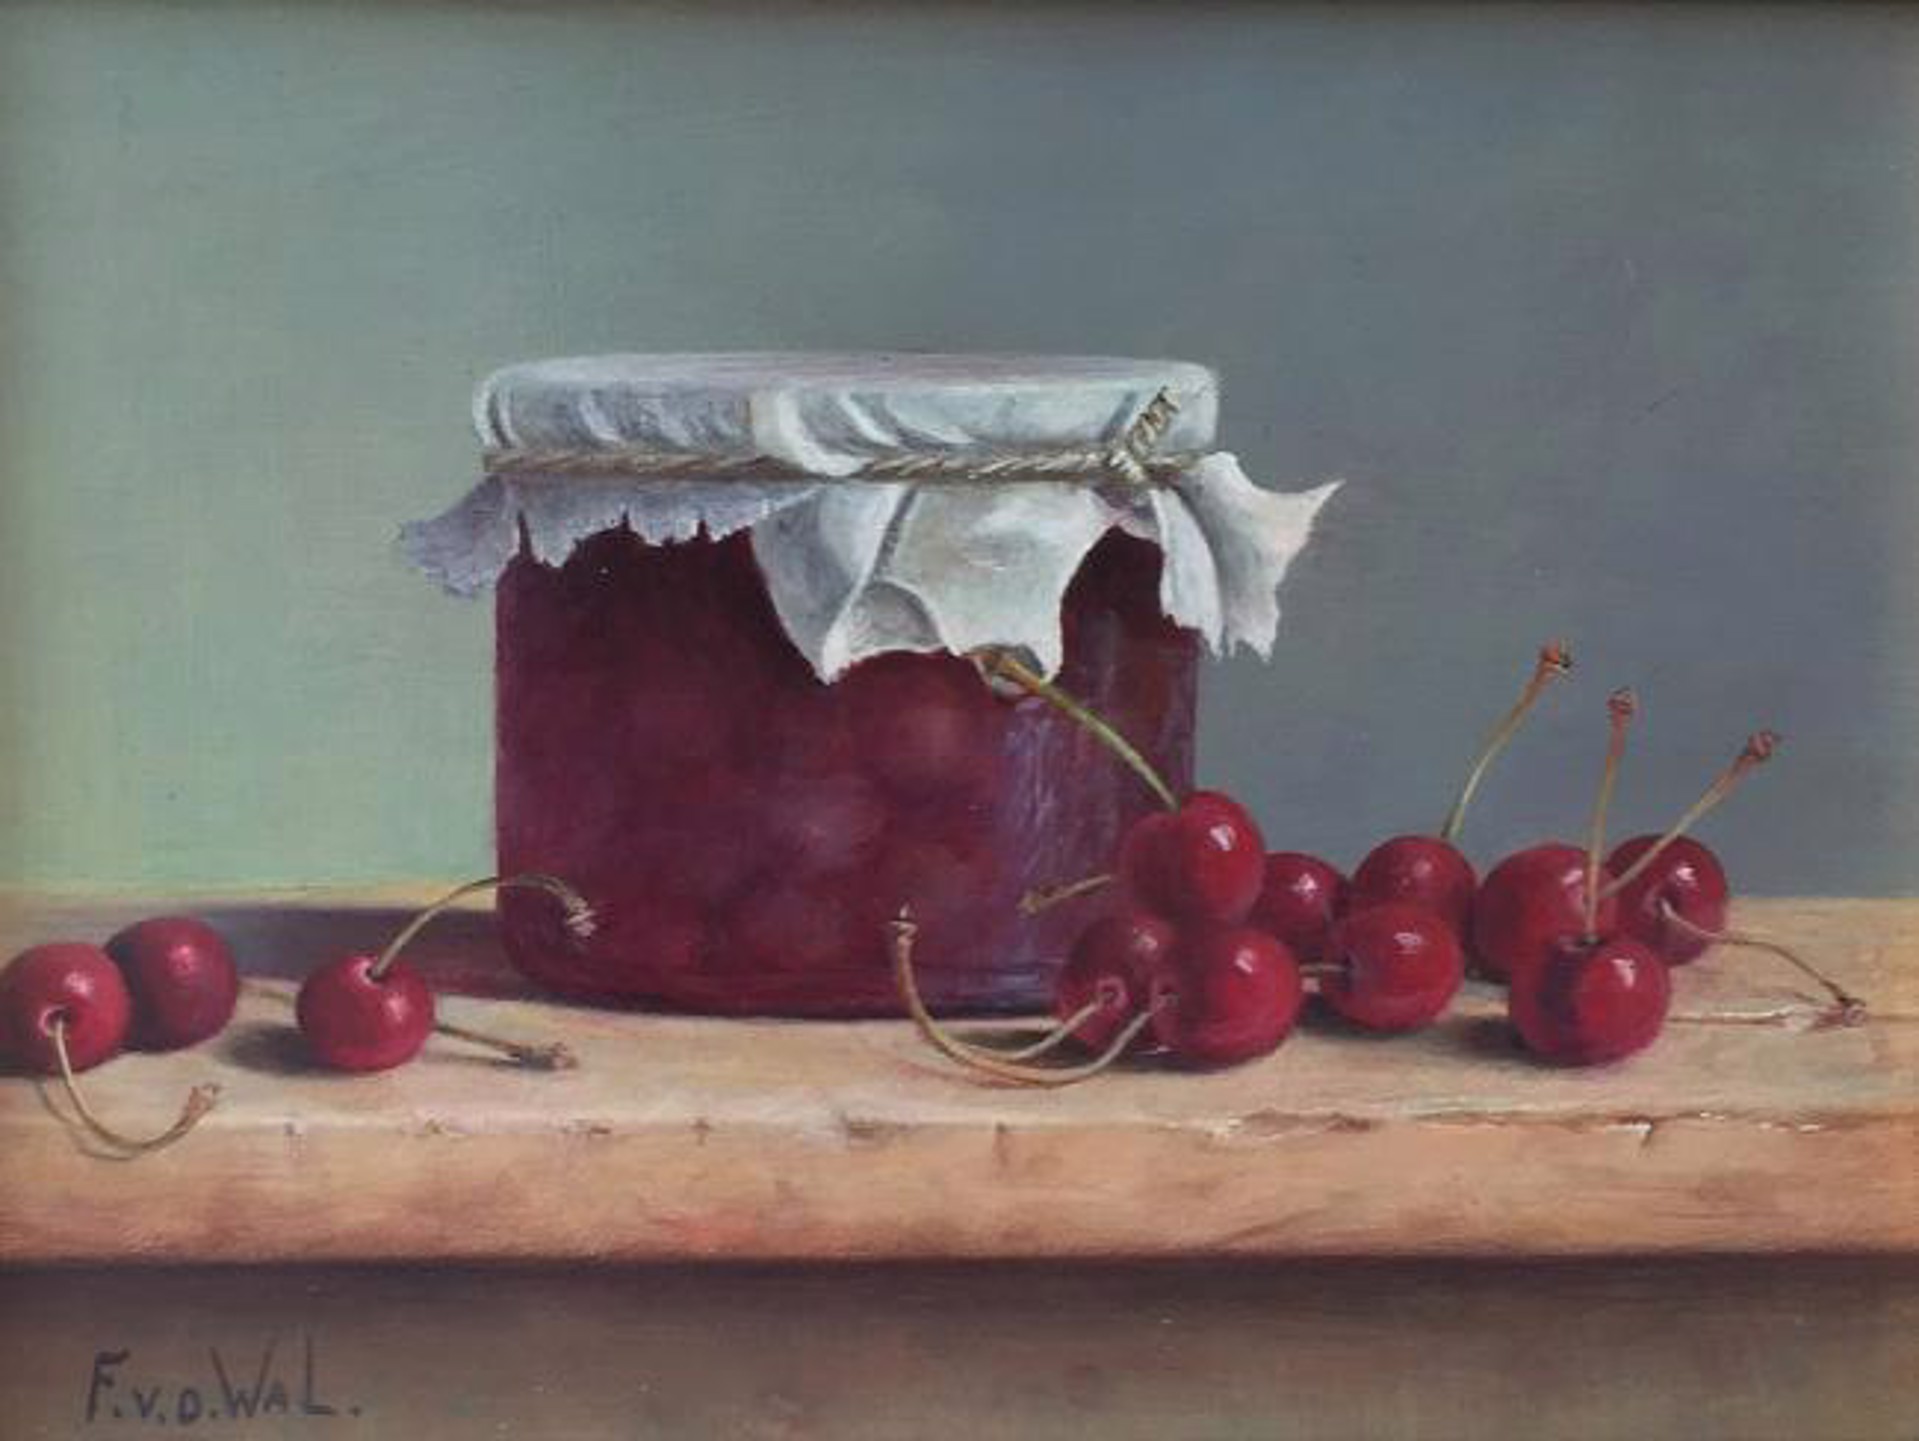 Still Life with Red Cherries by Frans Van der Wal